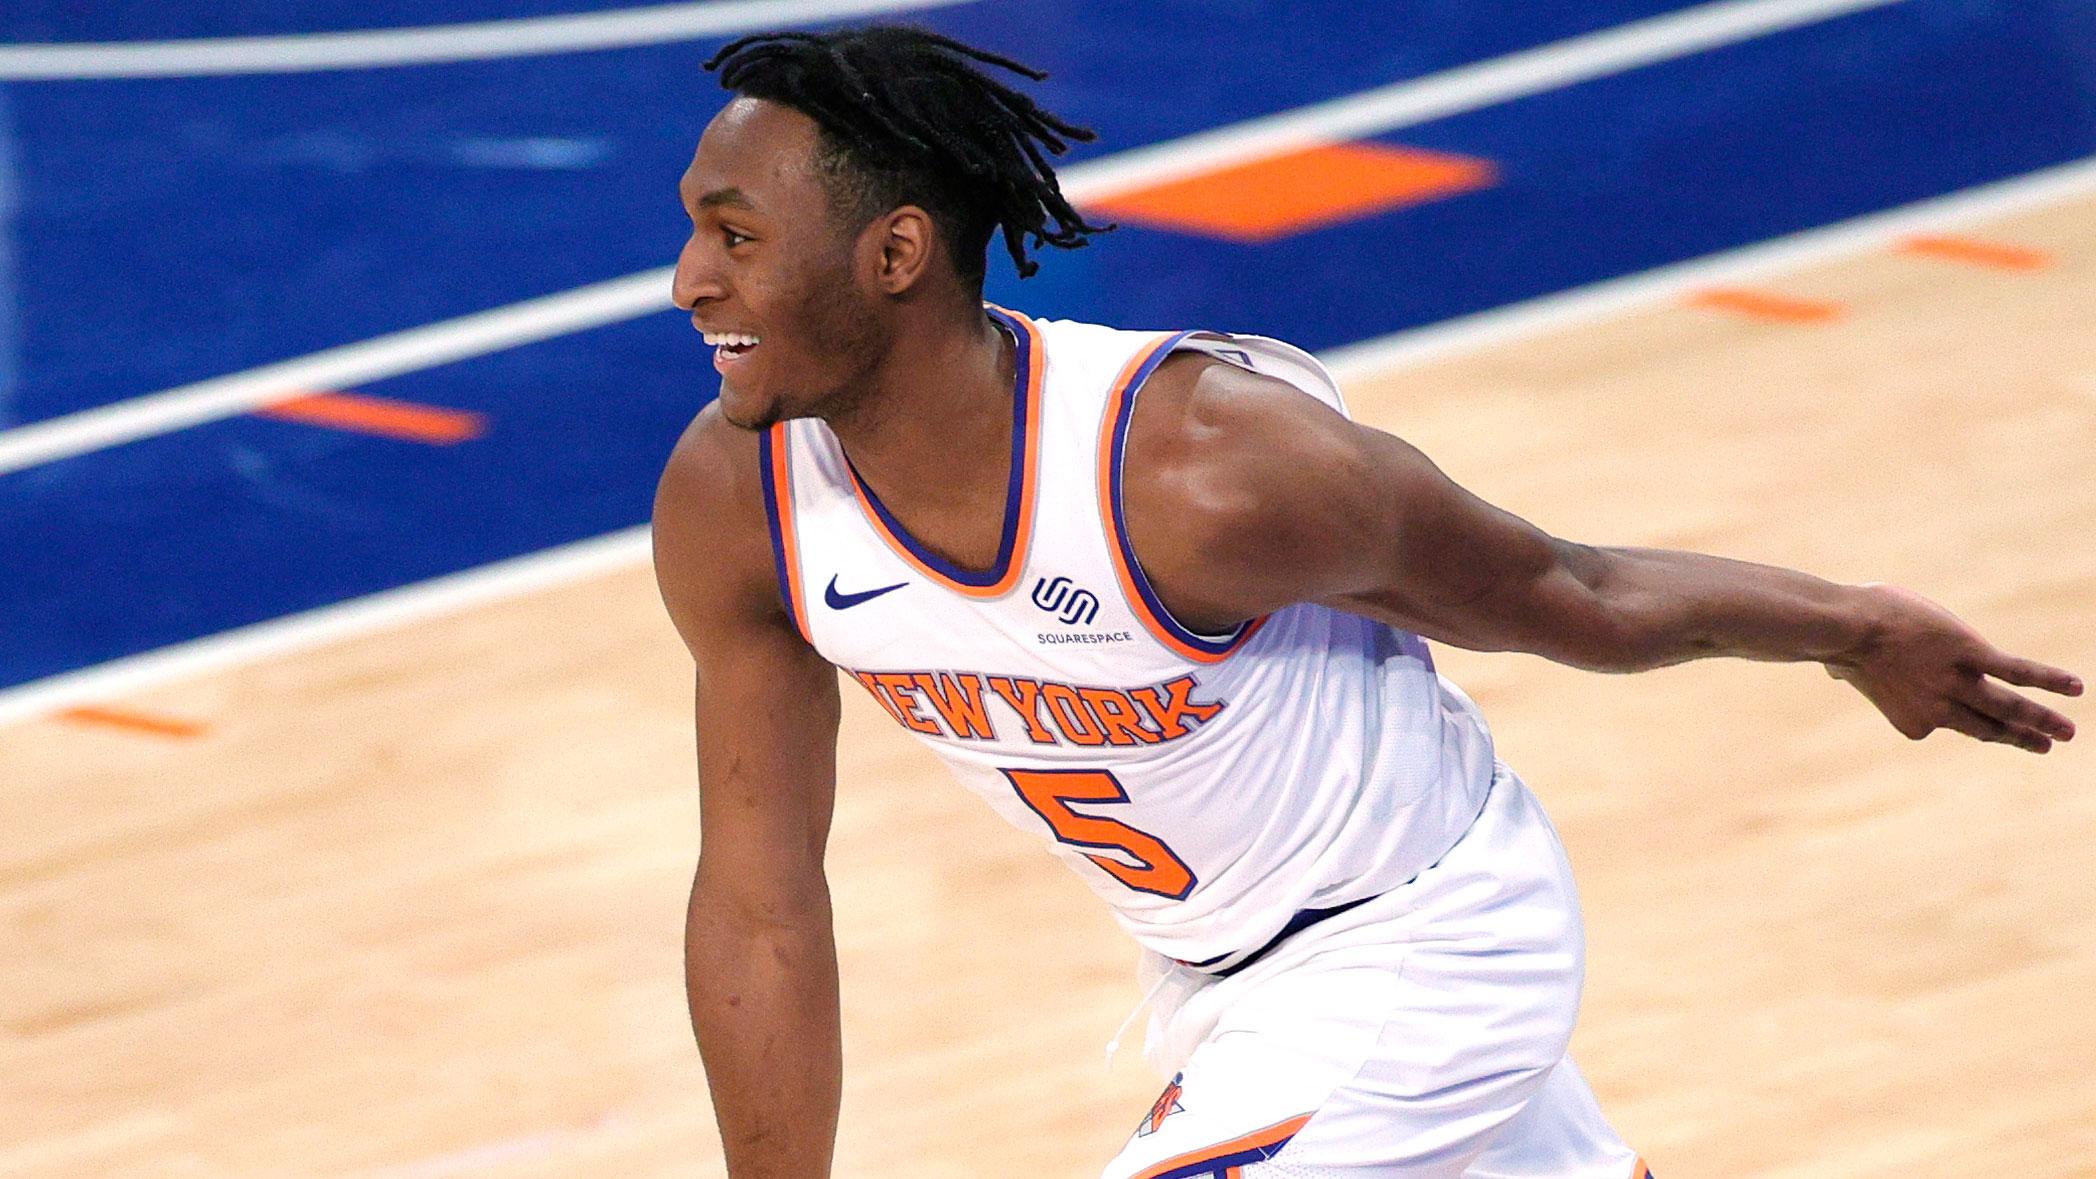 Apr 20, 2021; New York, New York, USA; Immanuel Quickley #5 of the New York Knicks reacts after making a three-point basket during the first half against the Charlotte Hornets at Madison Square Garden. / Sarah Stier/POOL PHOTOS-USA TODAY Sports